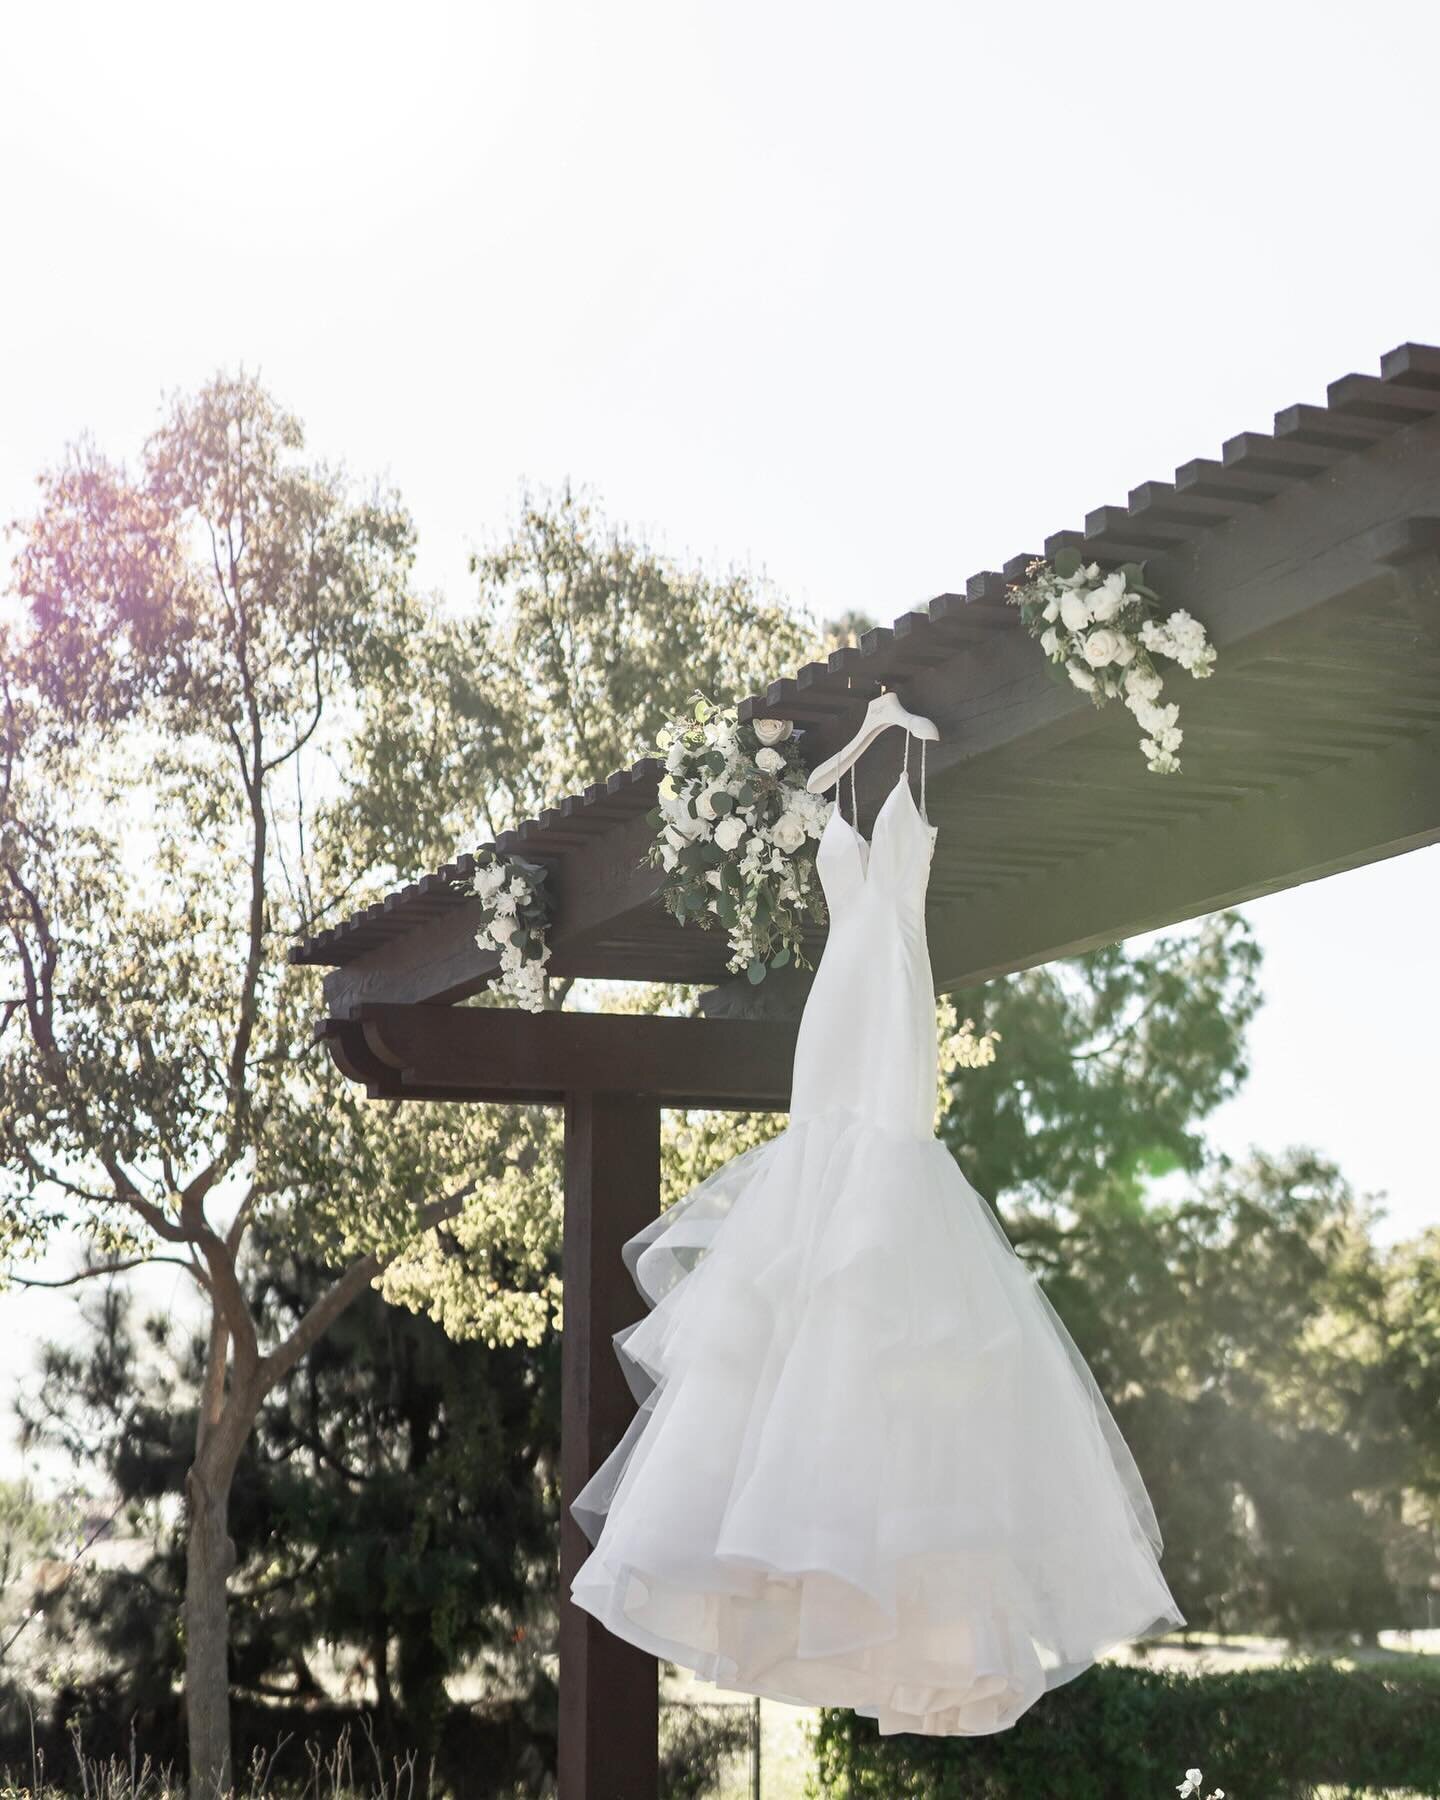 California details Love!
.
.
.
Stunning Wedding day details for this California wedding were breathtaking. We enjoyed working with this bride and groom during such a beautiful wedding. 
Photographer: @lajoyphotographyllc 

#californialove #california